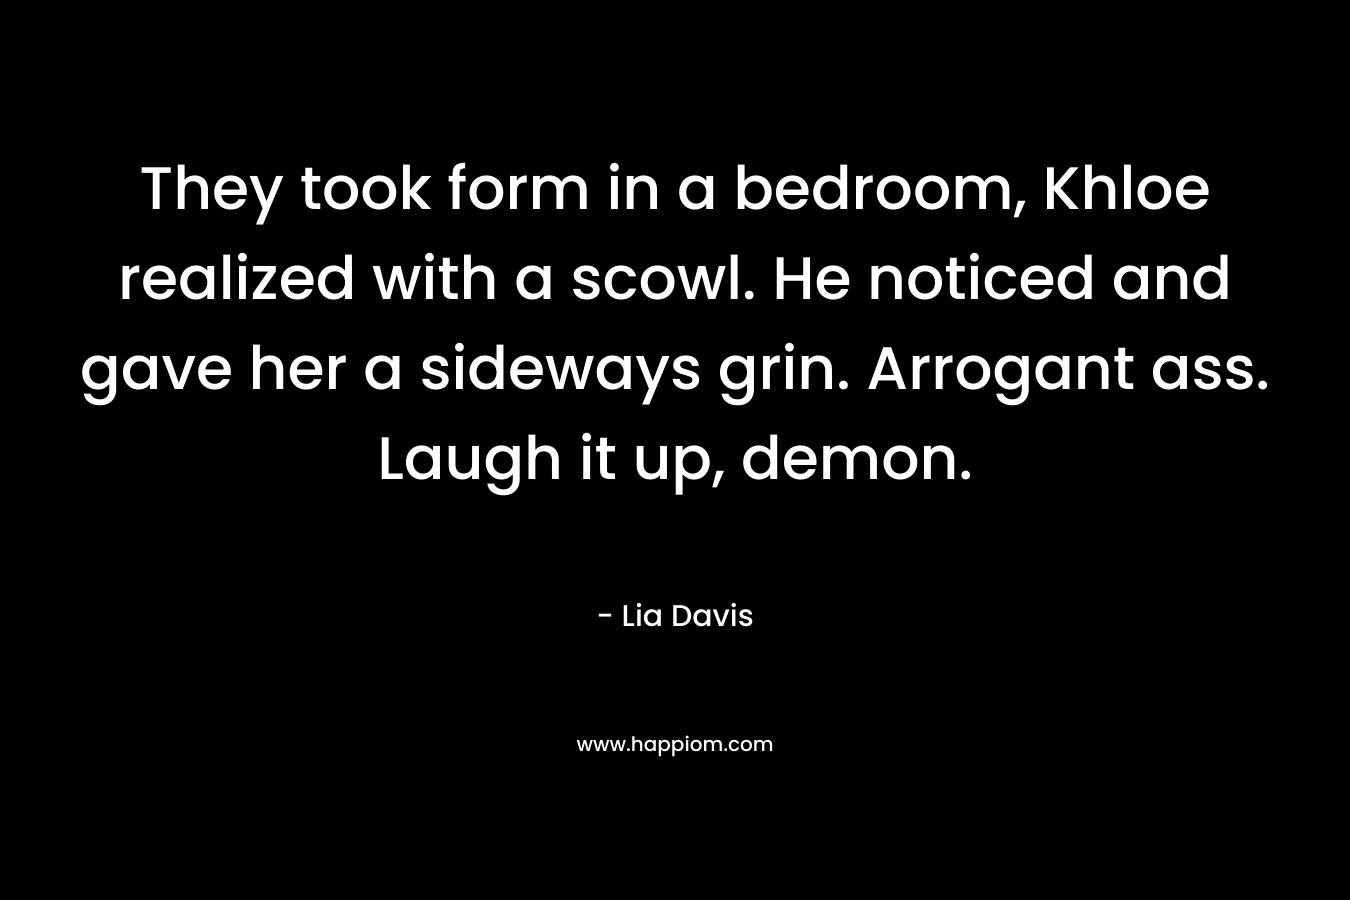 They took form in a bedroom, Khloe realized with a scowl. He noticed and gave her a sideways grin. Arrogant ass. Laugh it up, demon. – Lia Davis